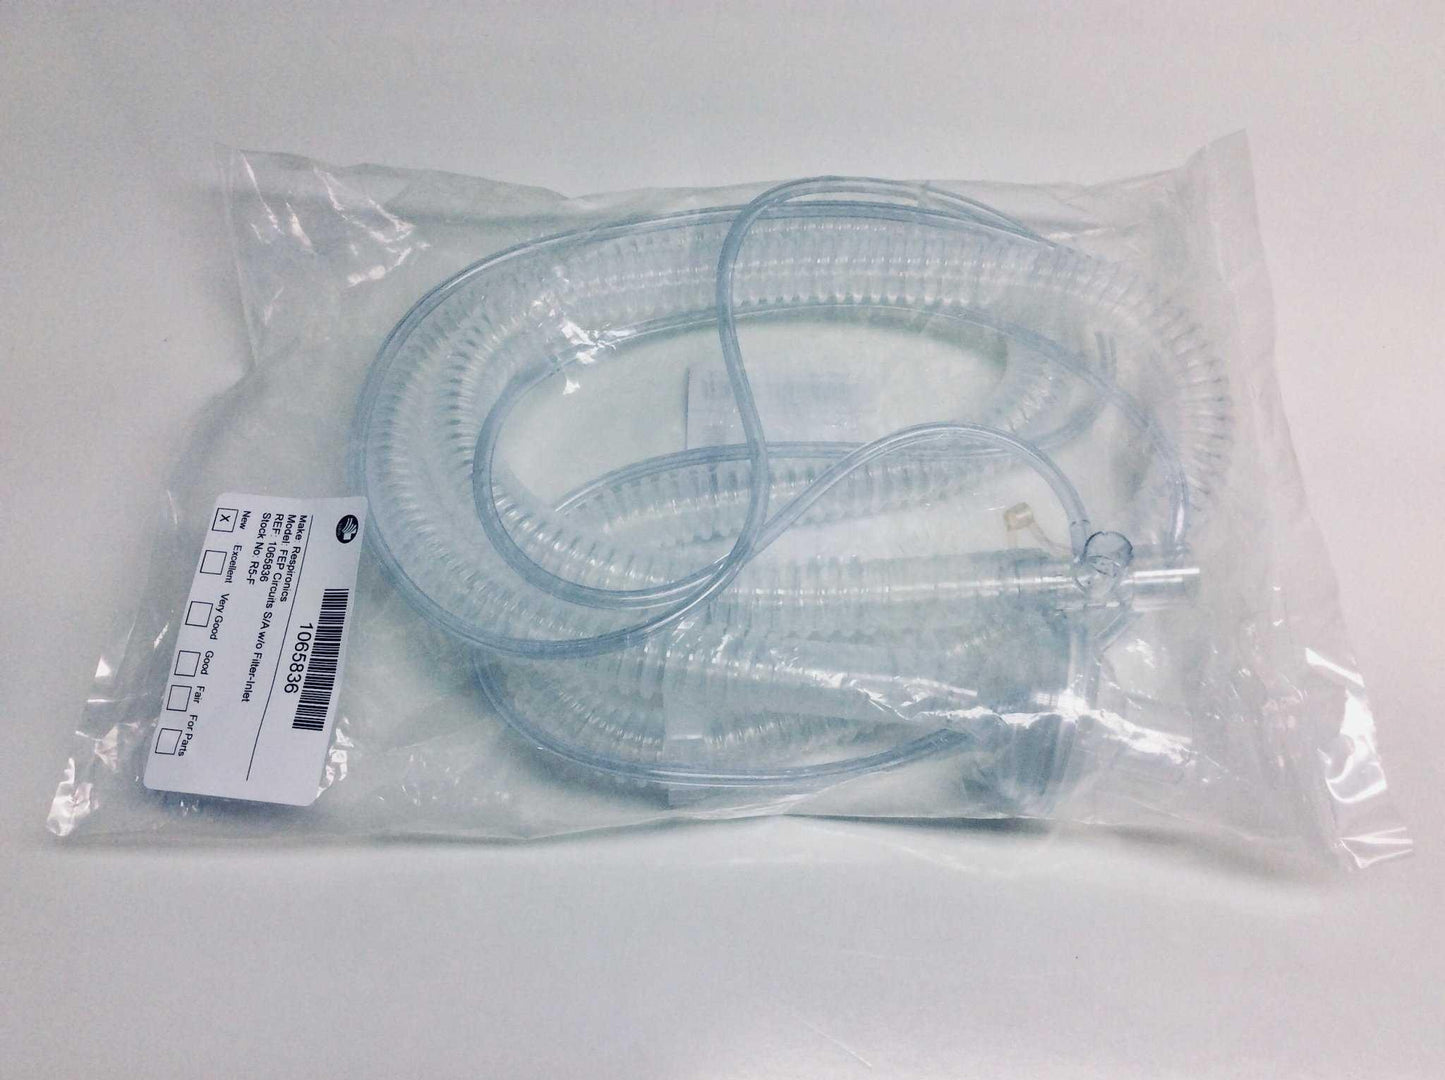 NEW Philips Respironics FEP Patient Circuit S/A without Filter INTL 1065836 FREE Shipping - MBR Medicals